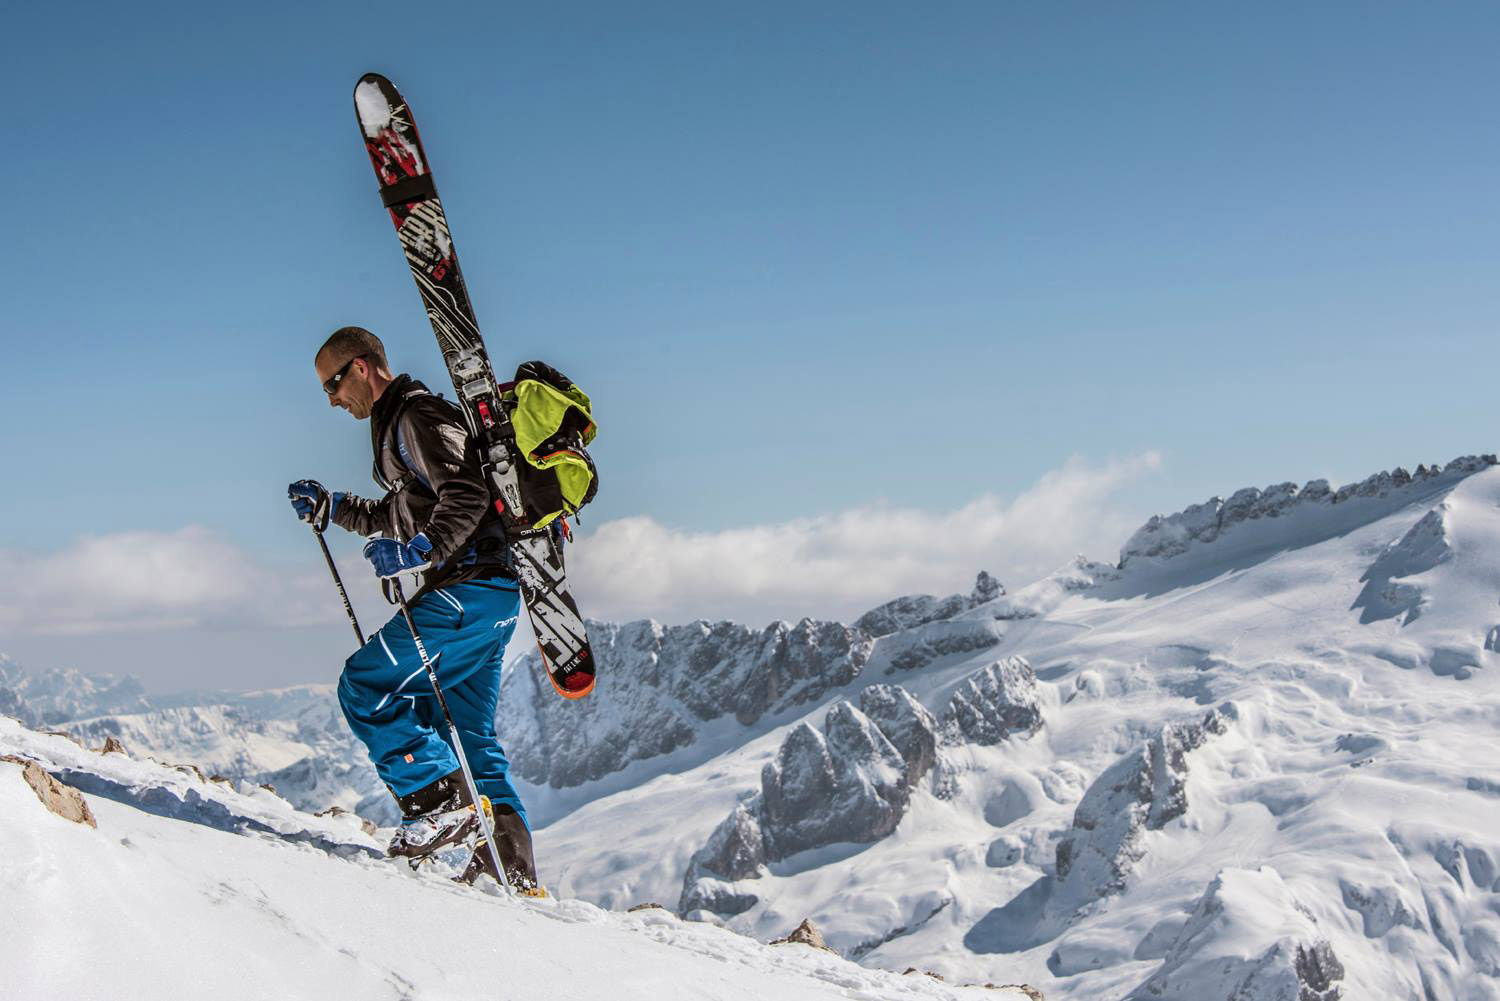  A winter season is…   More than just a ski holiday     Getting a job   